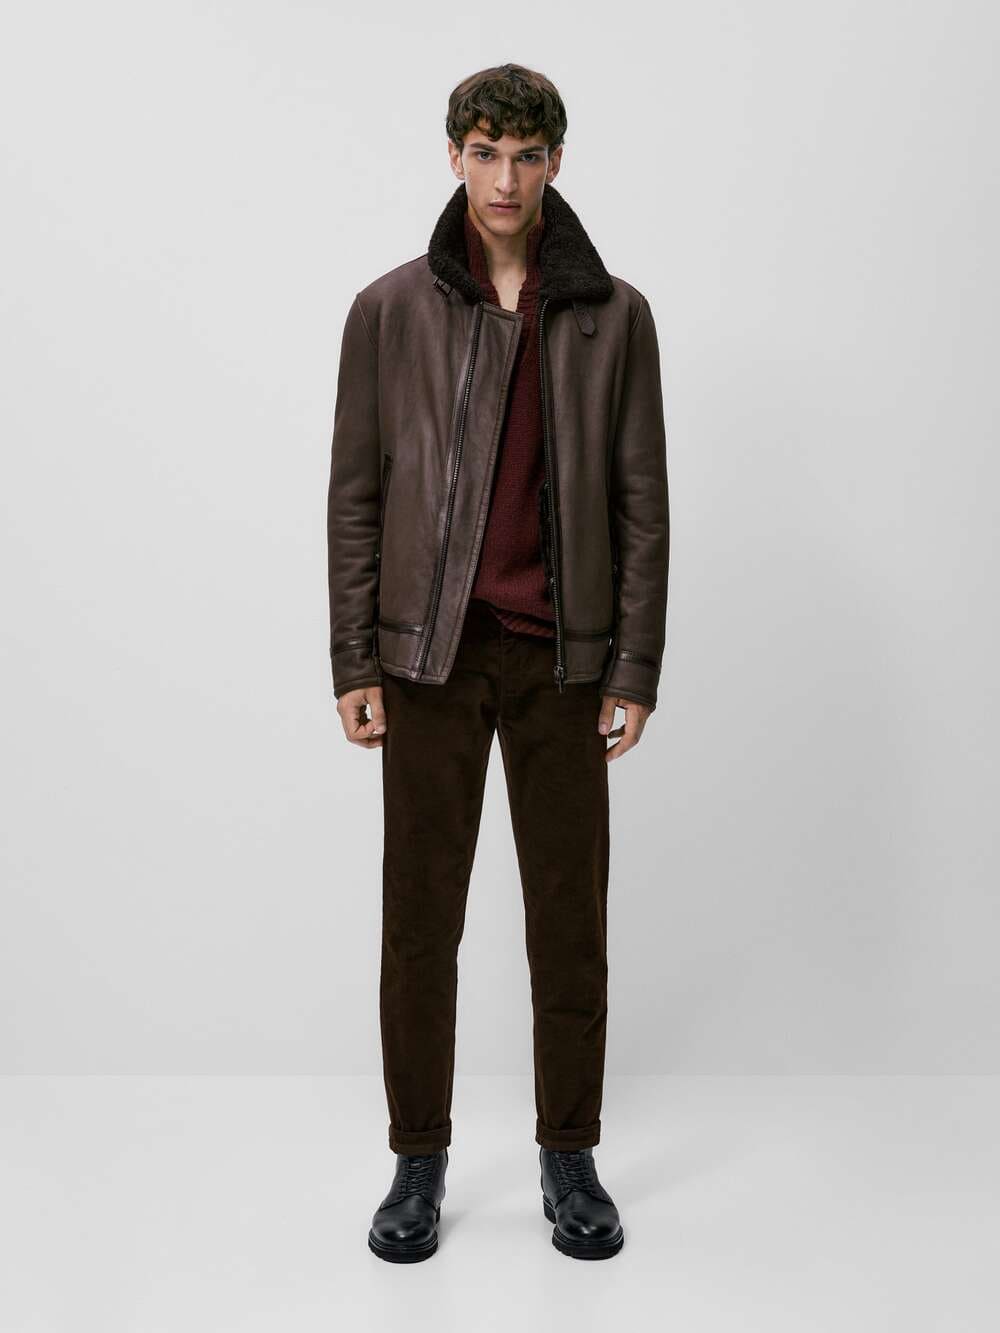 ZARA DOUBLE-FACED LEATHER JACKET LIMITED EDITION